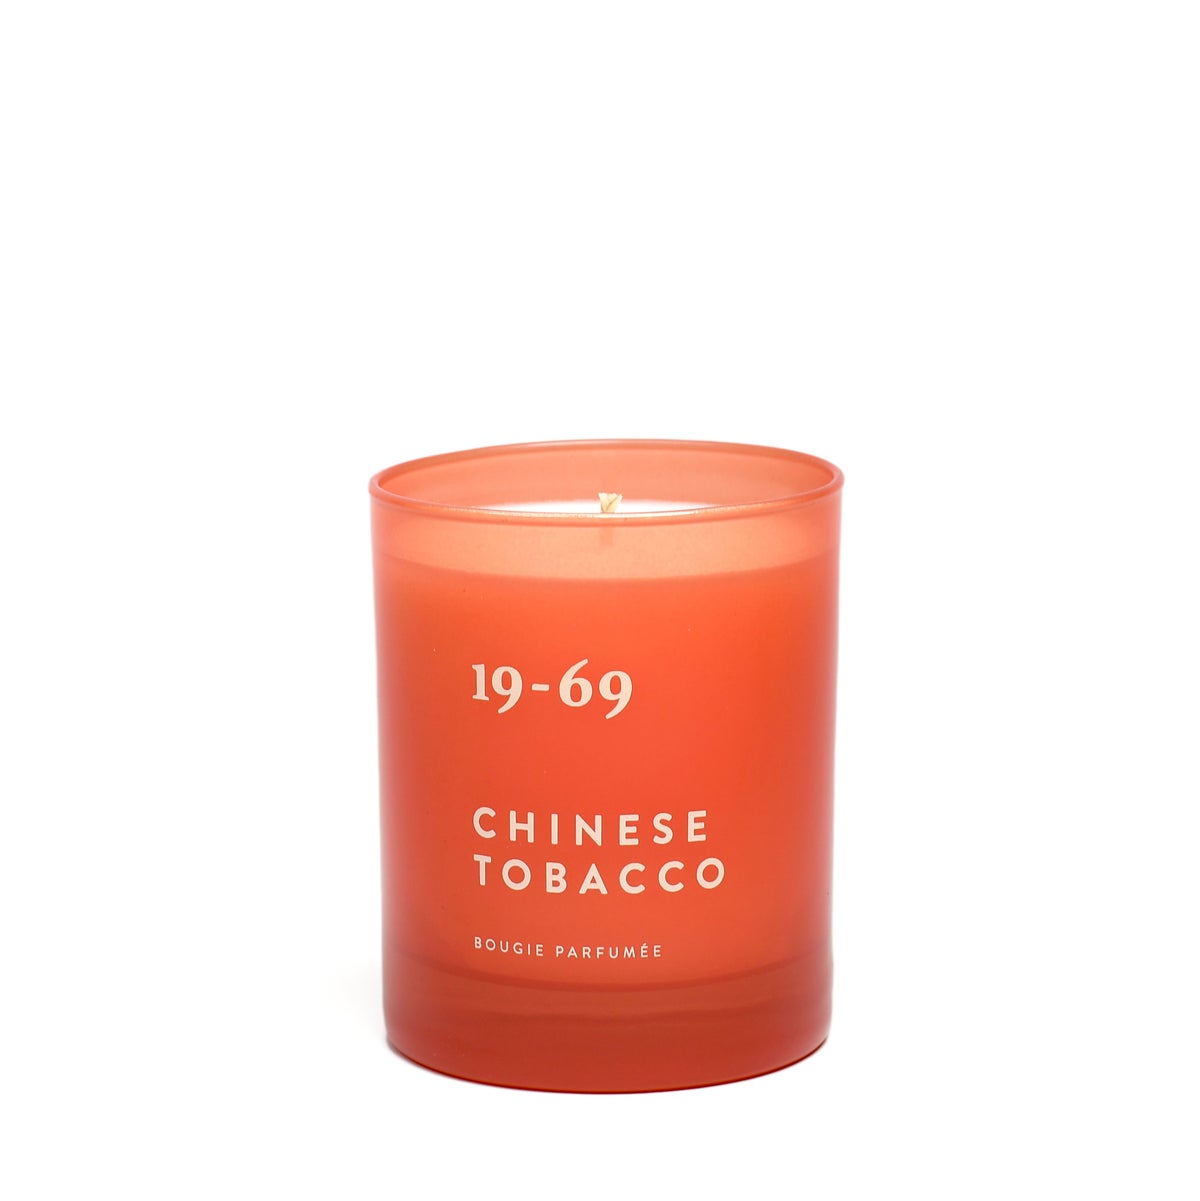 19-69 - BOUGIE PARFUME CANDLE - CHINESE TOBACCO